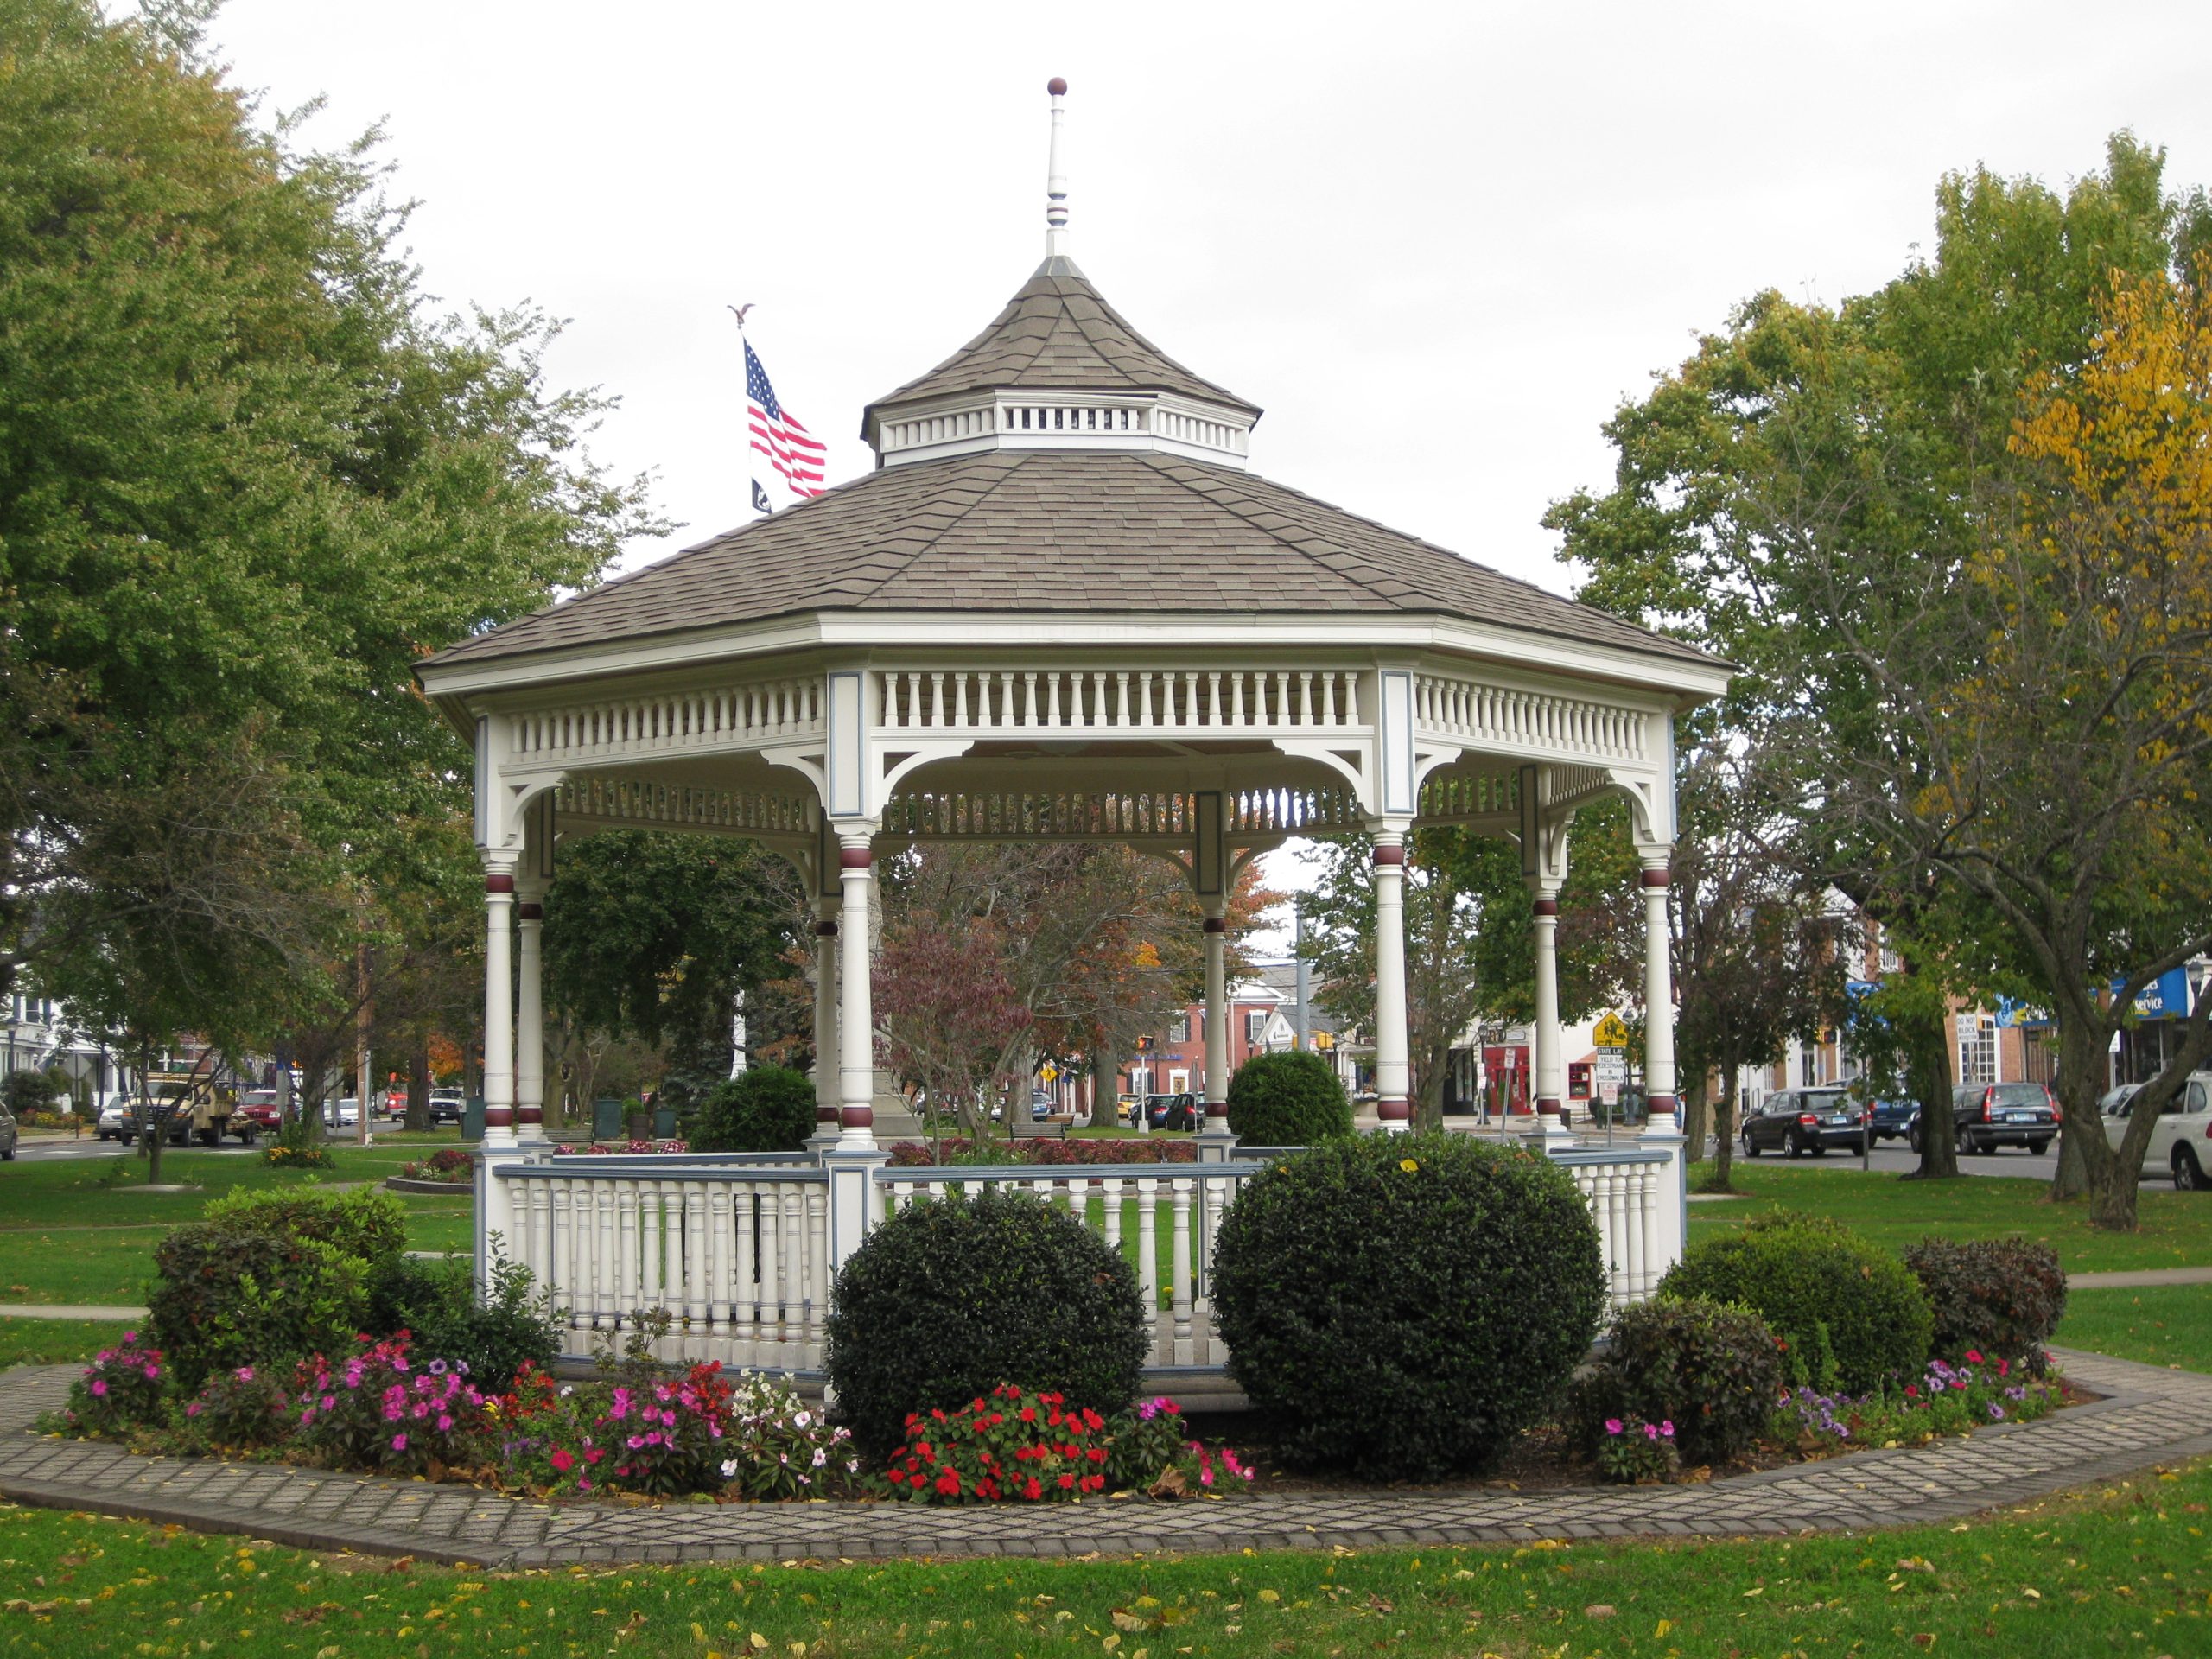 Gazebo (user submitted)